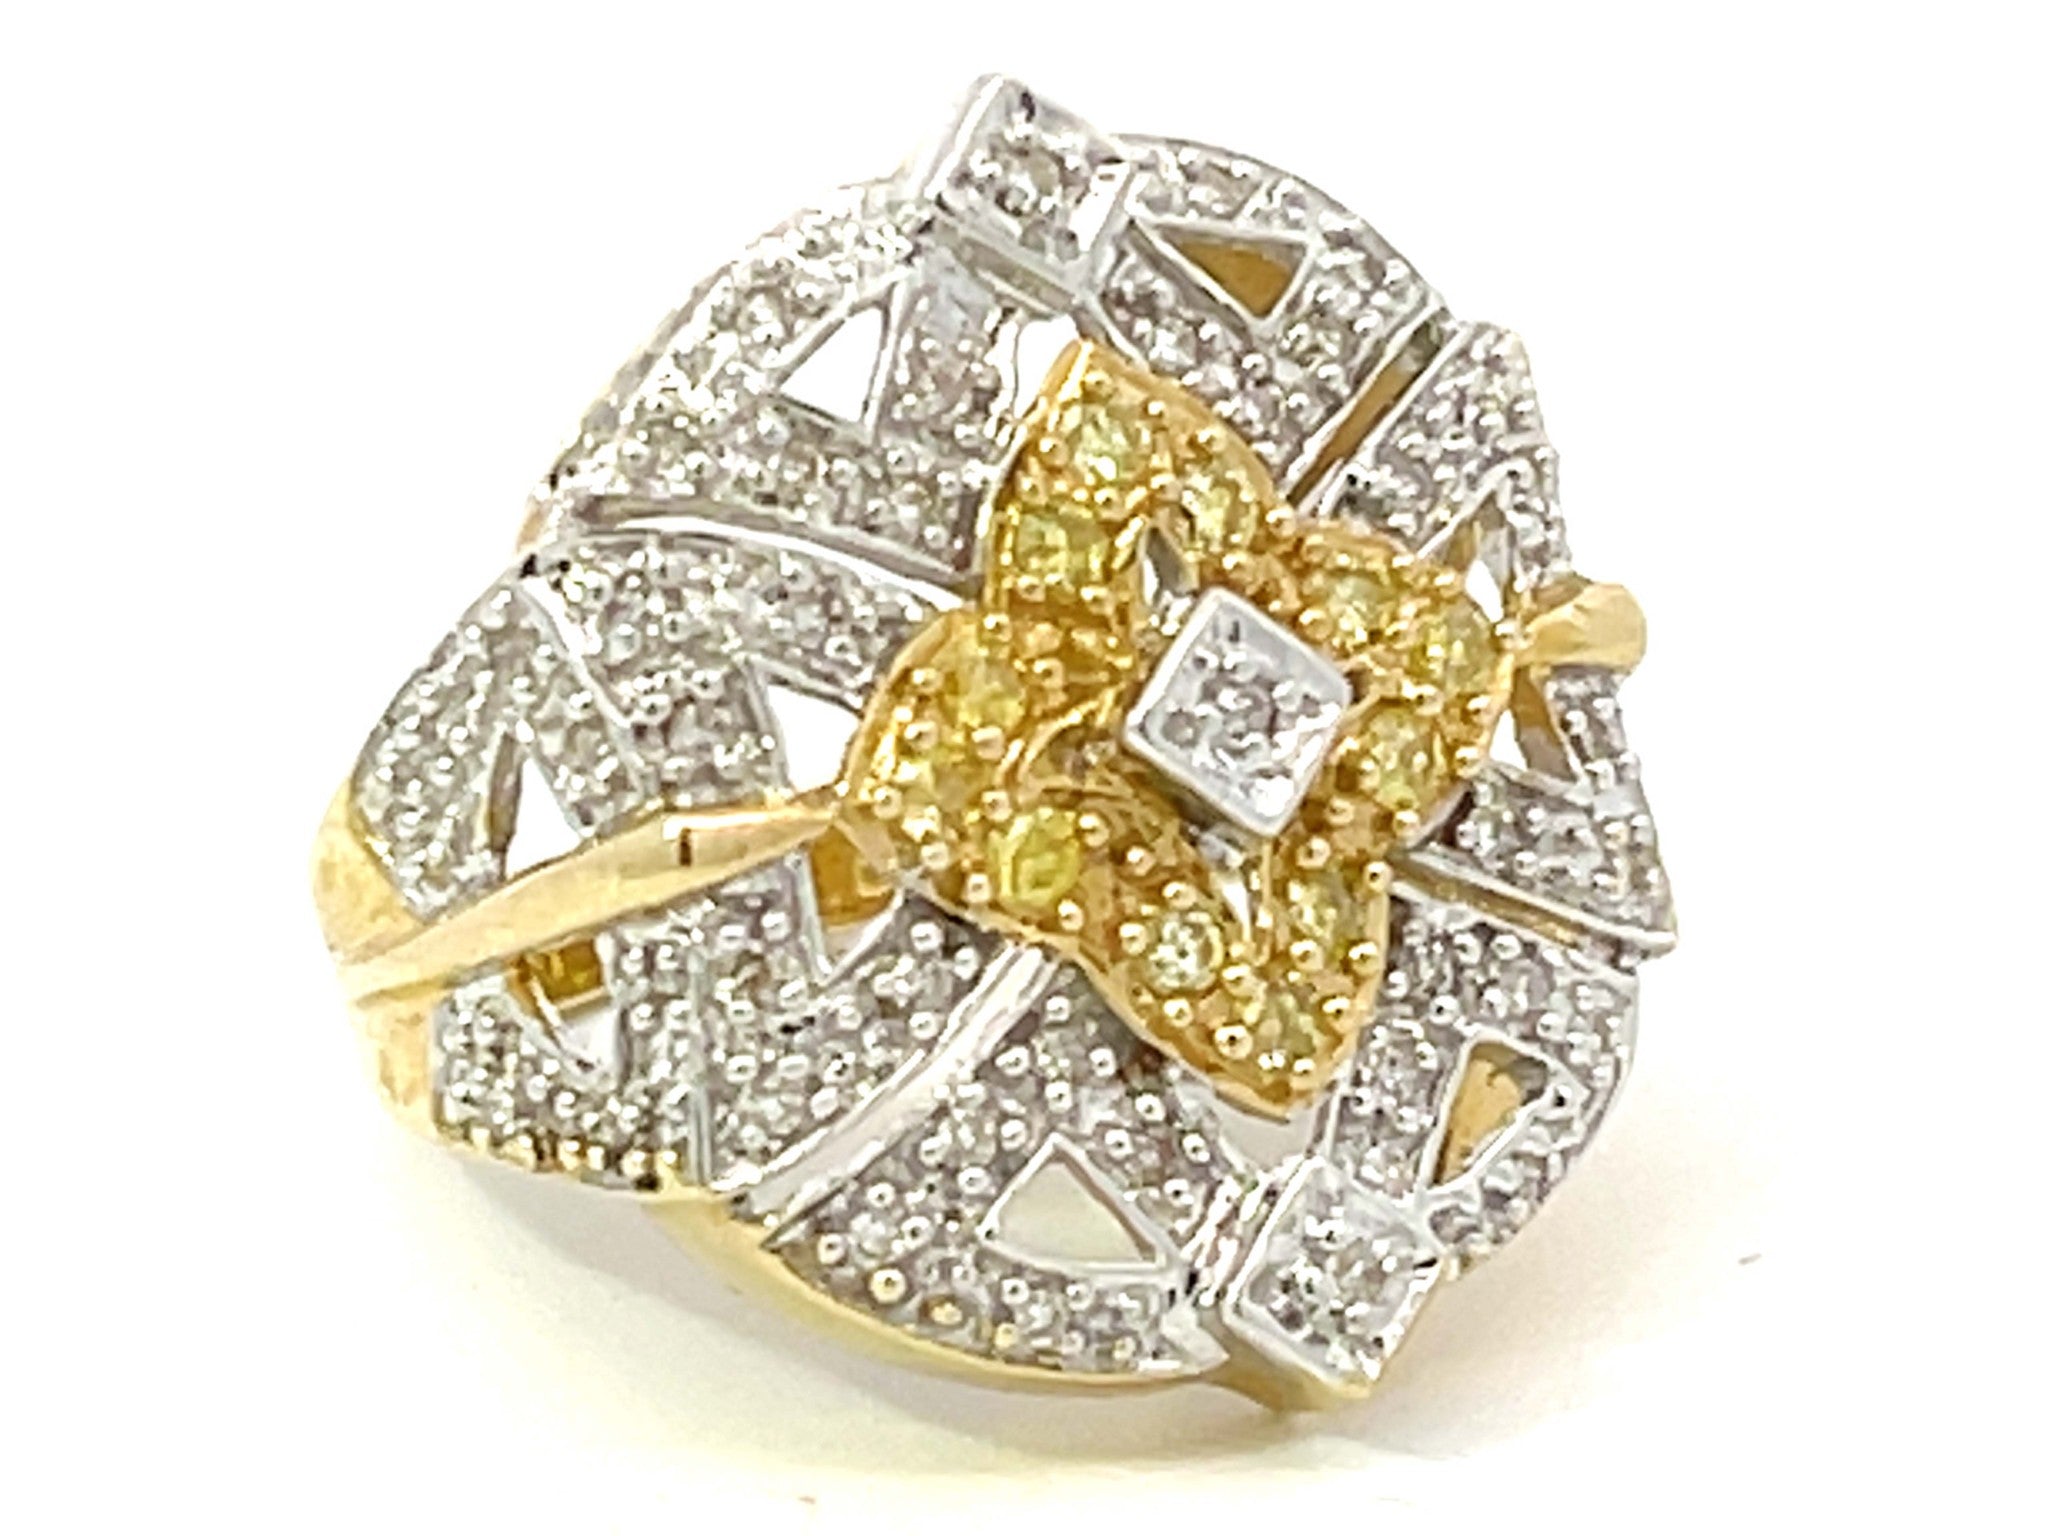 Experience luxury with our White and Fancy Yellow Diamond Leaf Dome Ring in 14k White Gold. Discover our collection at Solitaire Jewelers.